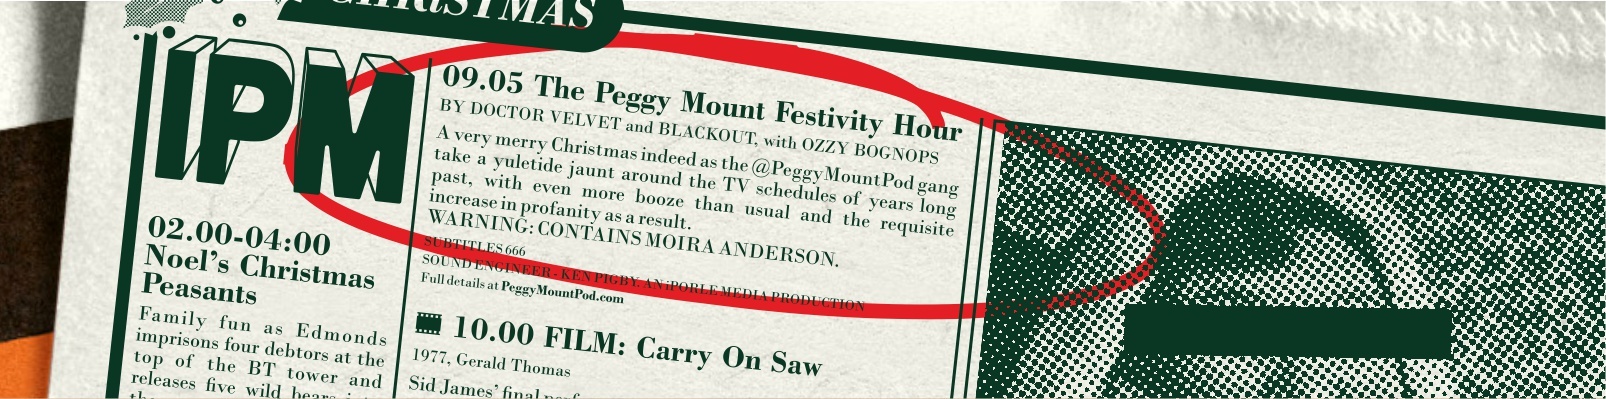 The Peggy Mount Calamity Hour